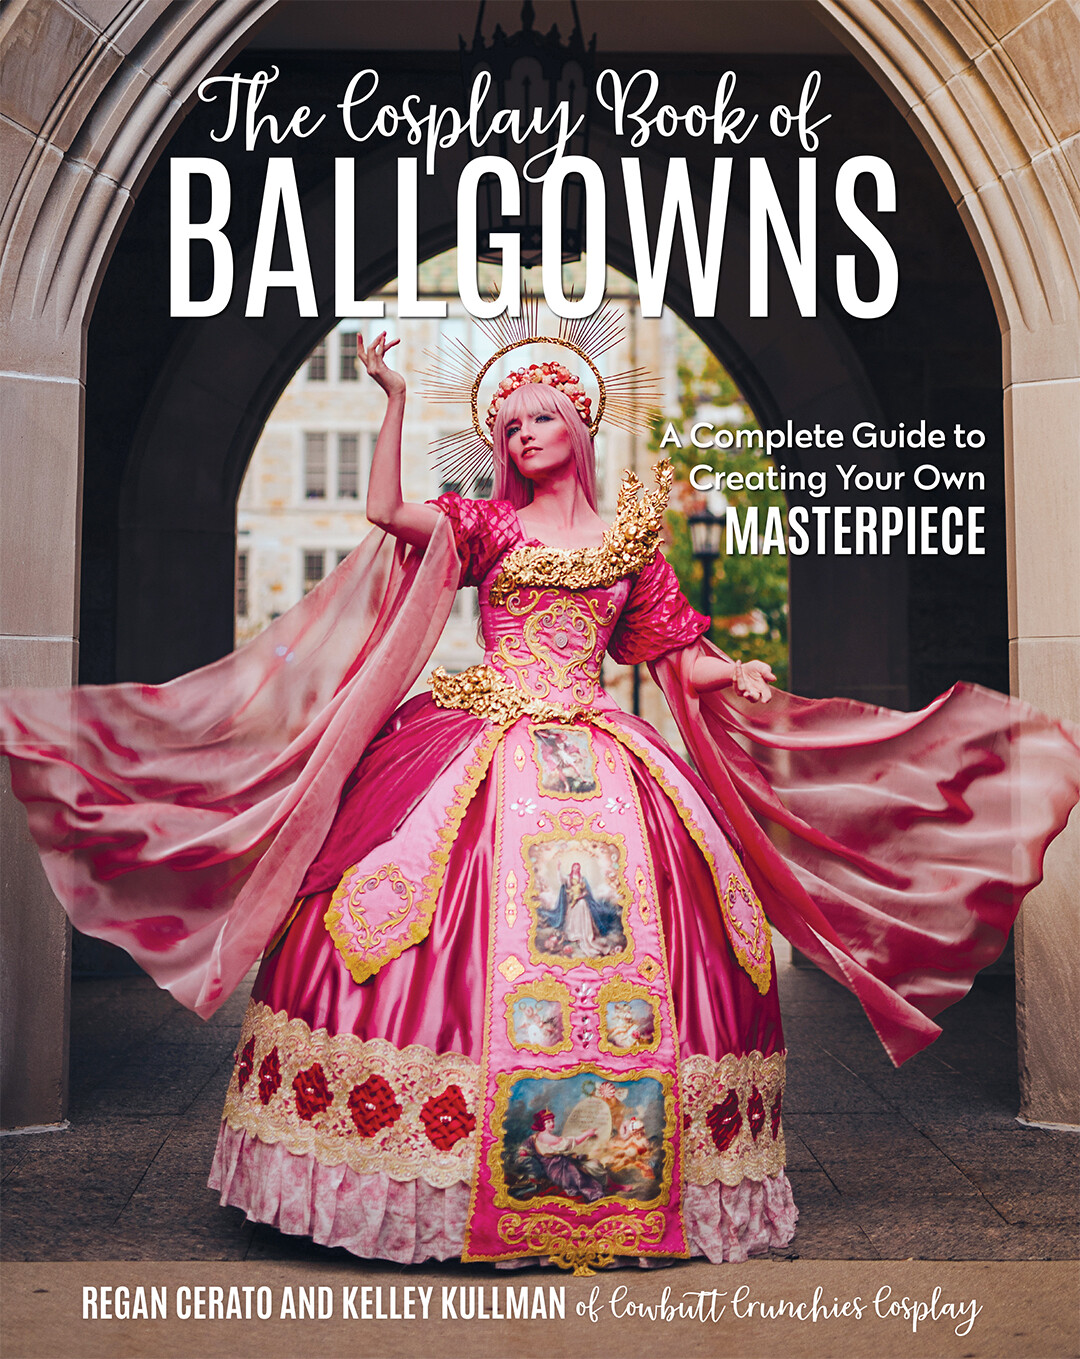 The Cosplay Book of Ballgowns - Author Signed